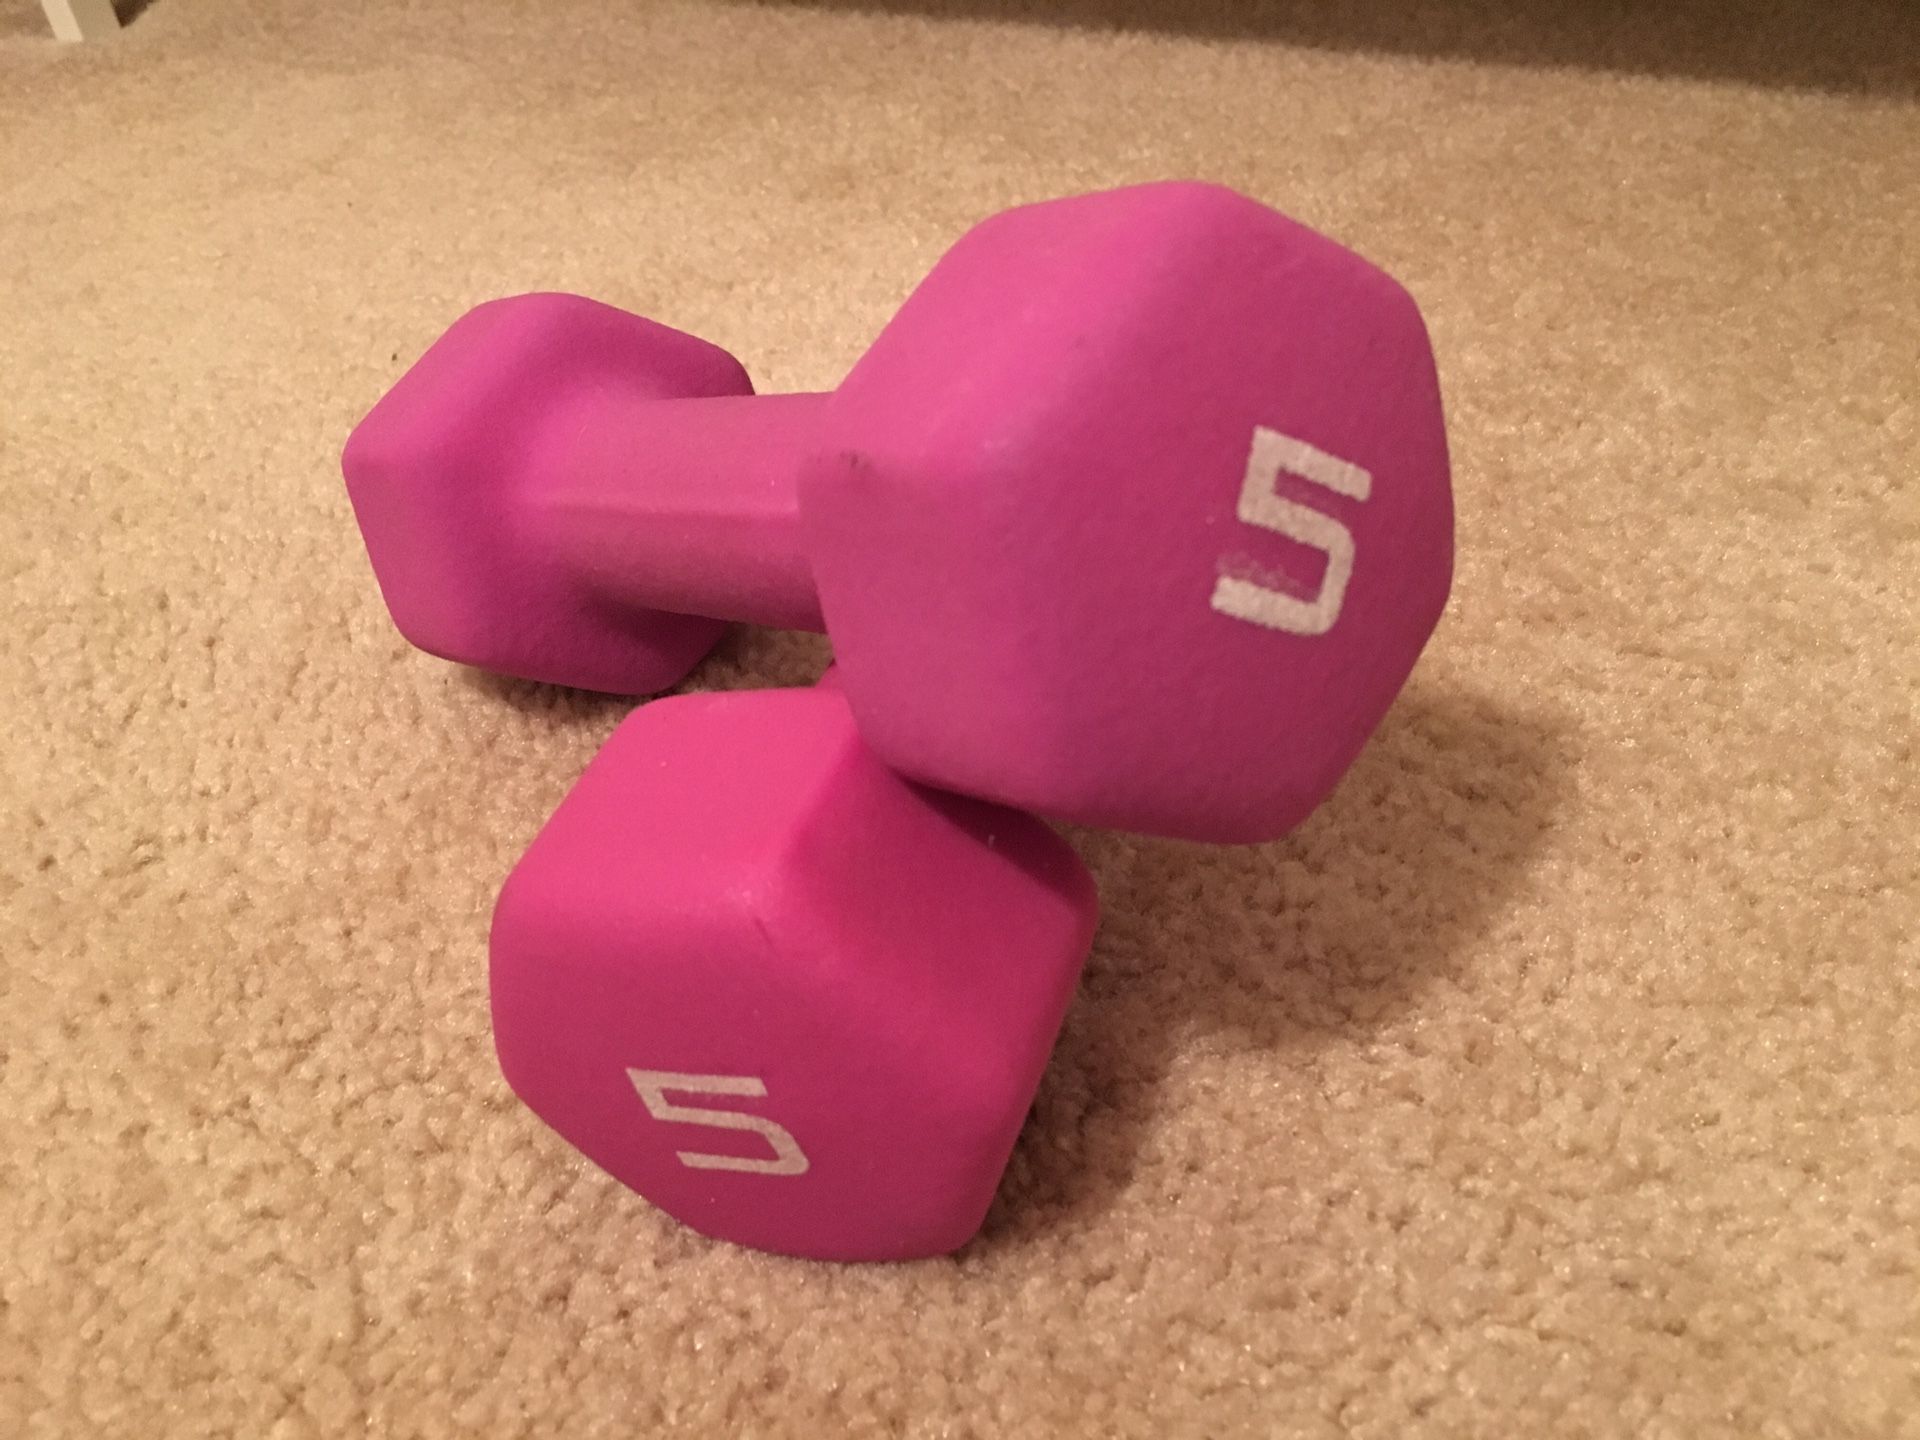 5lb weights